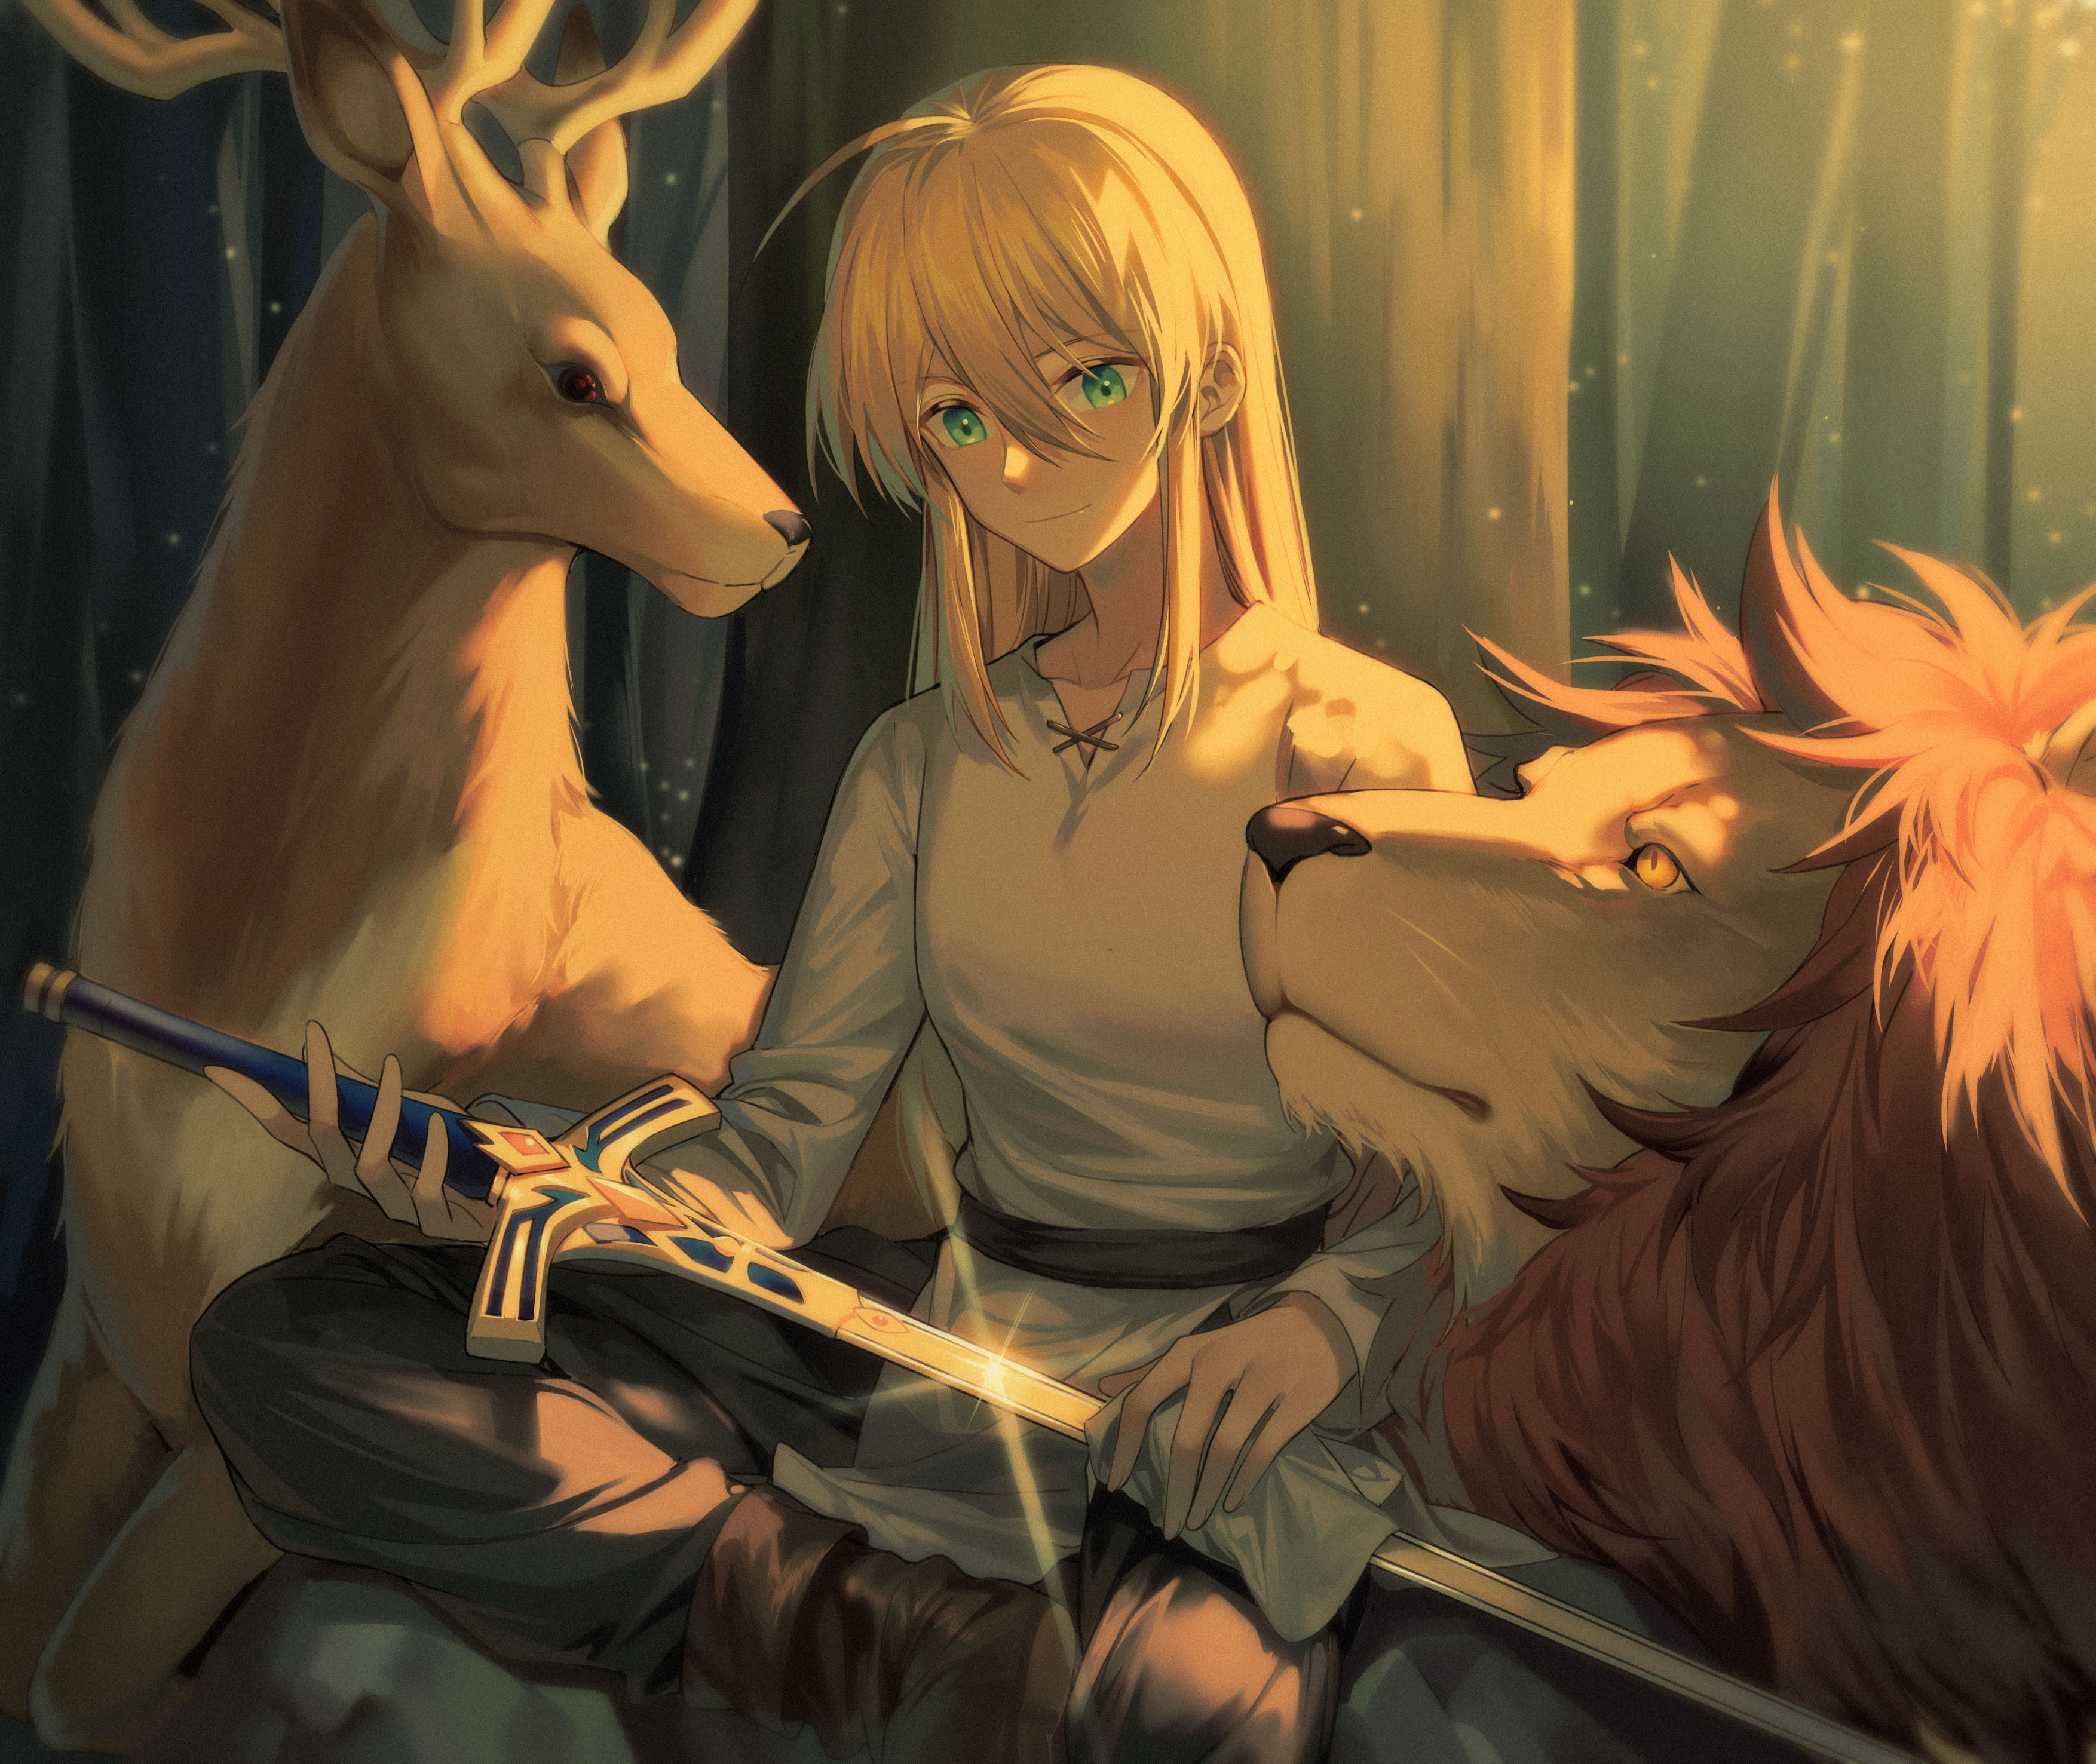 Fate Series FGO Fate Zero Fate Stay Night Long Hair Blond Hair Anime Girls Women With Swords Ahoge D 3508x2953